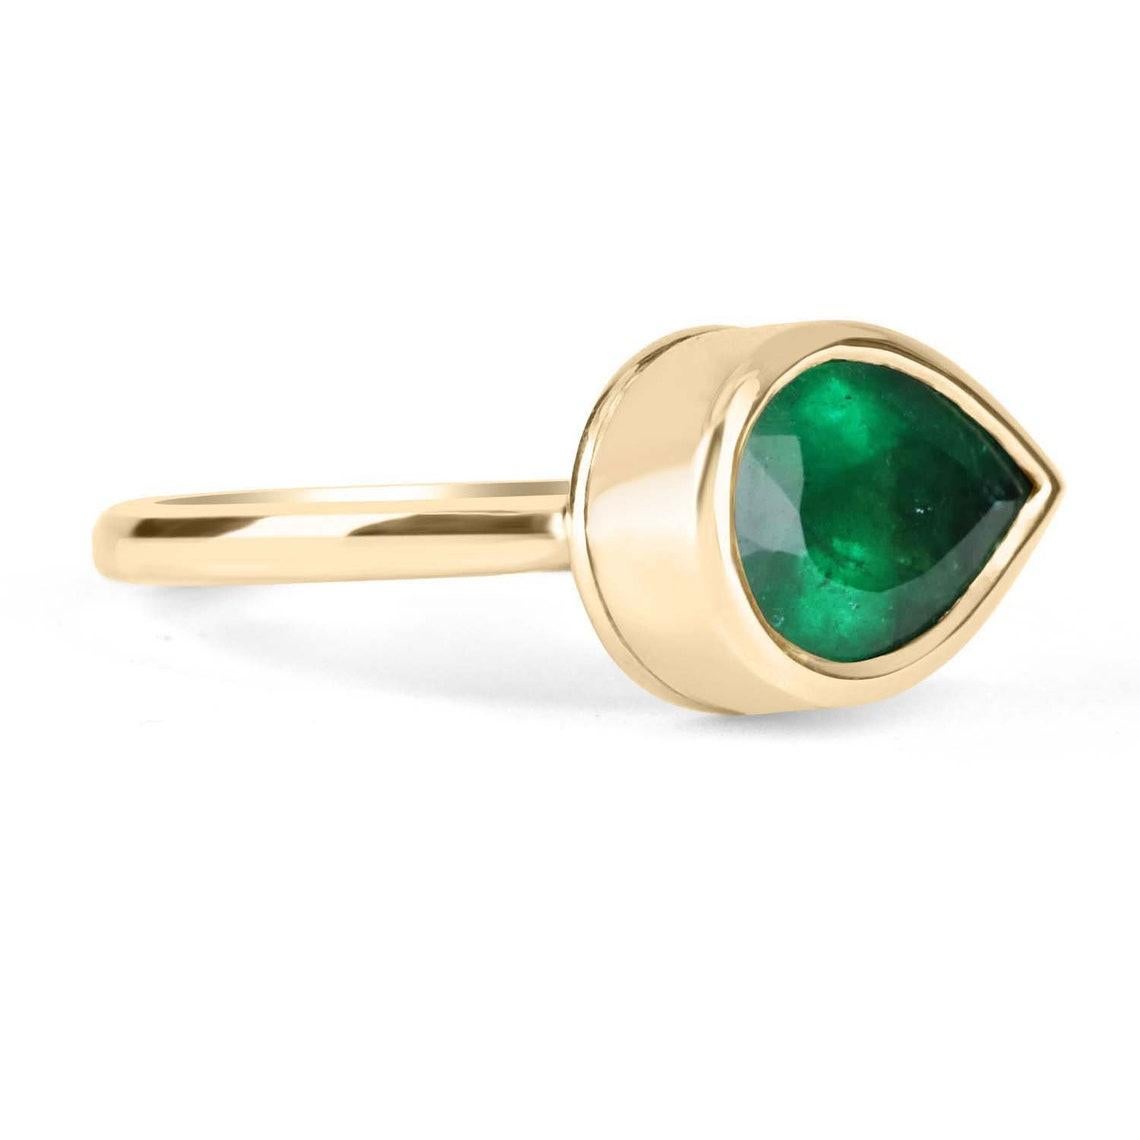 This ring is not for the faint of heart! Displayed is a Colombian emerald bezel-set, teardrop solitaire ring in 18K gold. This gorgeous solitaire ring carries a full 7.0-carat emerald that will have you gazing at its mystic beauty. This large gem